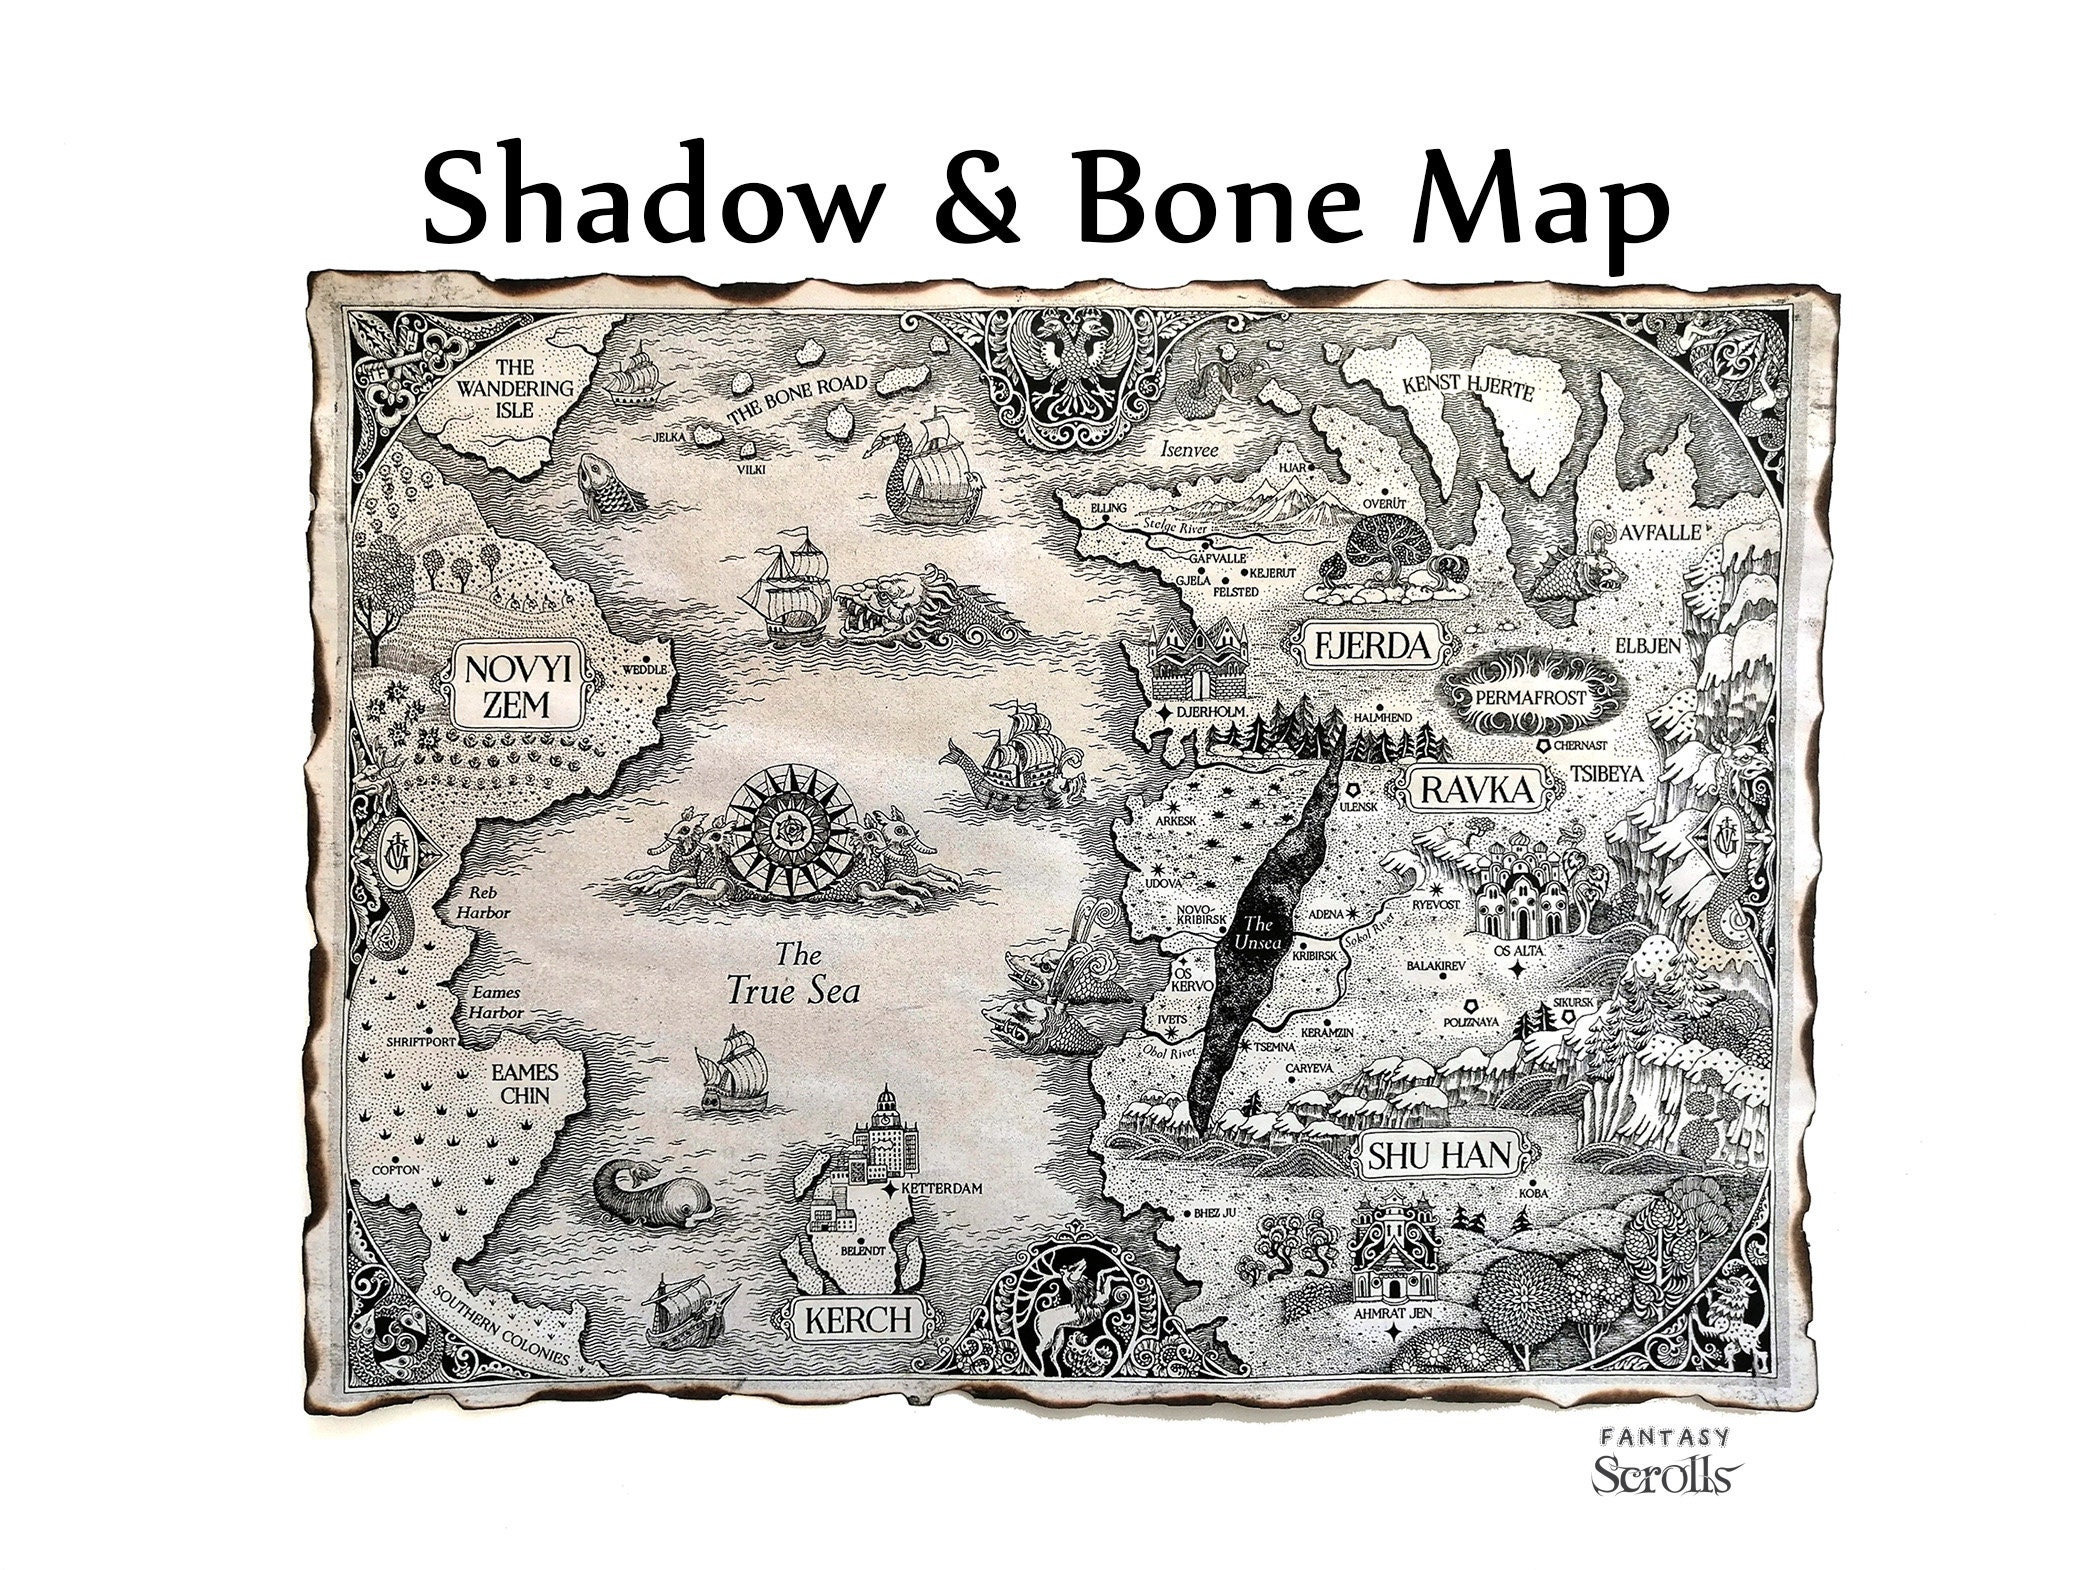 What Is a Grisha in 'Shadow and Bone?' Inside the Mythology